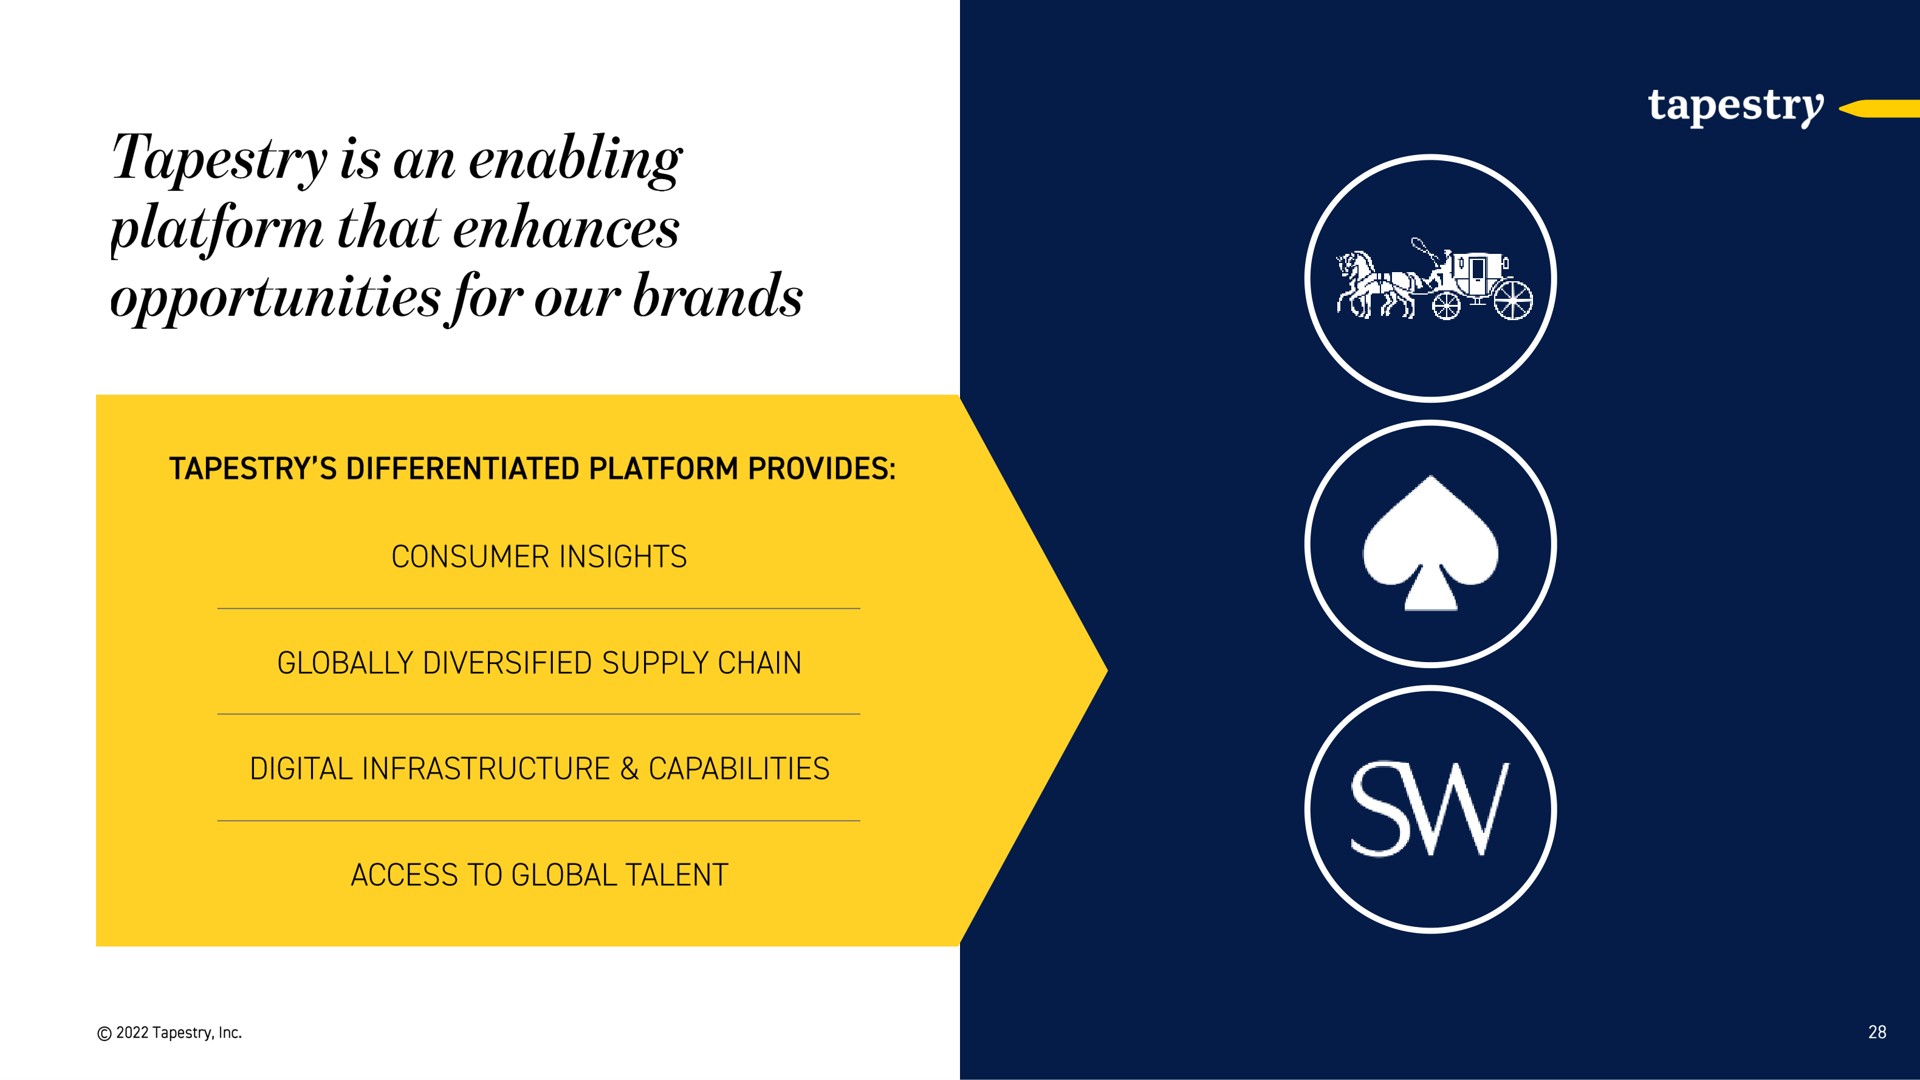 spawns tapestry is an enabling platform that enhances opportunities for our brands | Tapestry